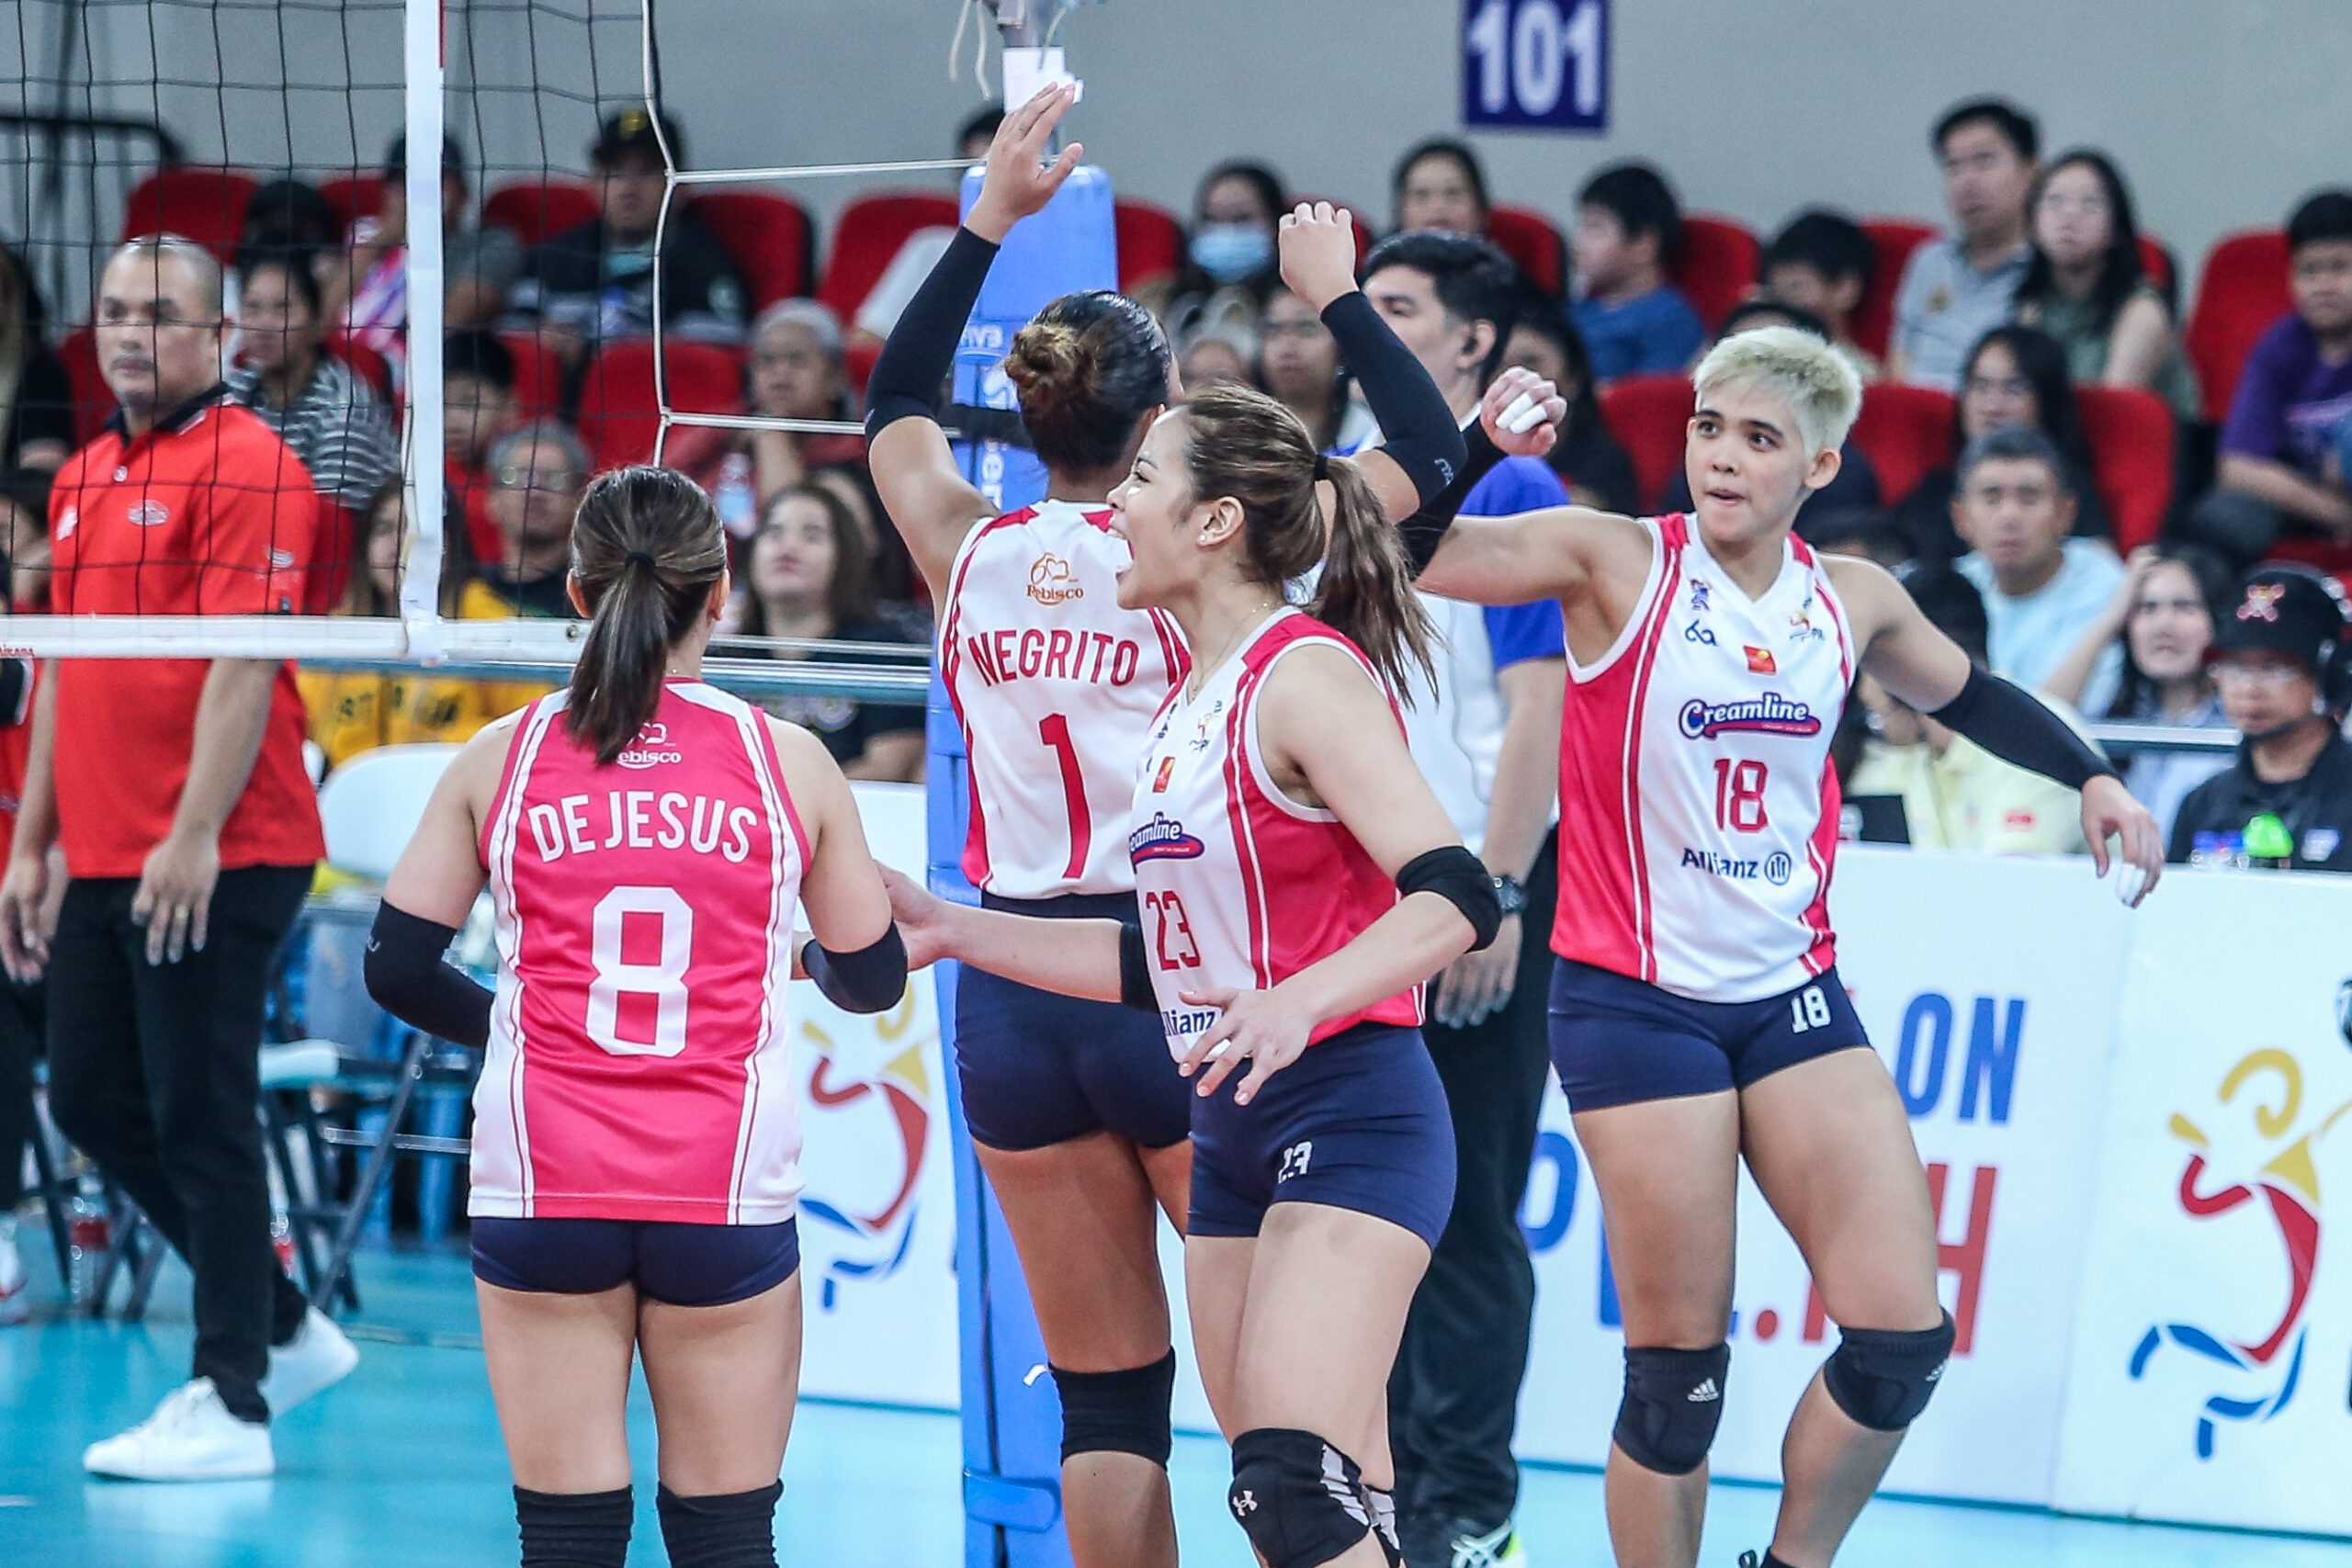 Creamline continues to thrive despite missing key players